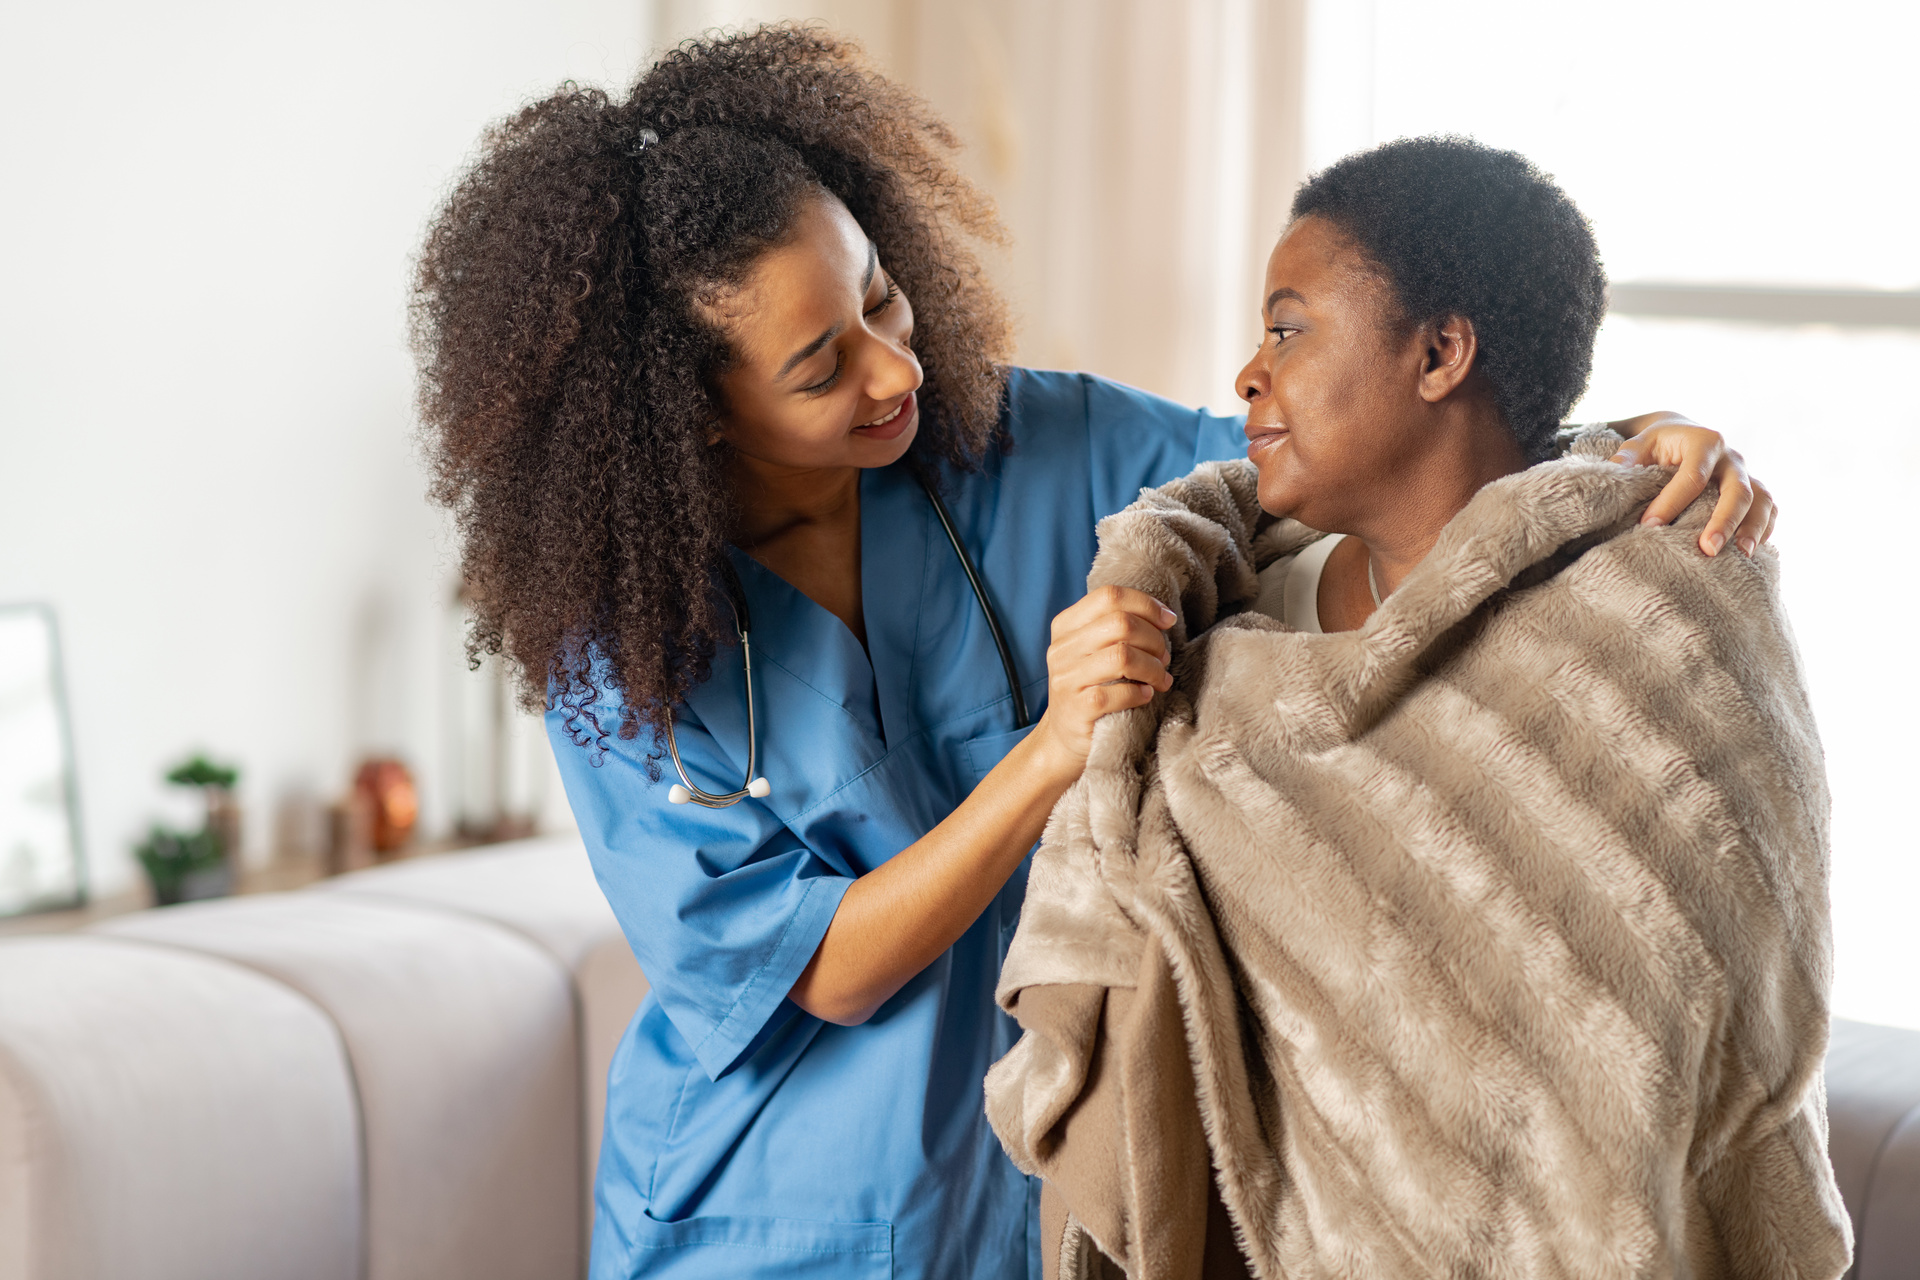 Certified nursing assistant helps to comfort patient by putting a blanket around their shoulders